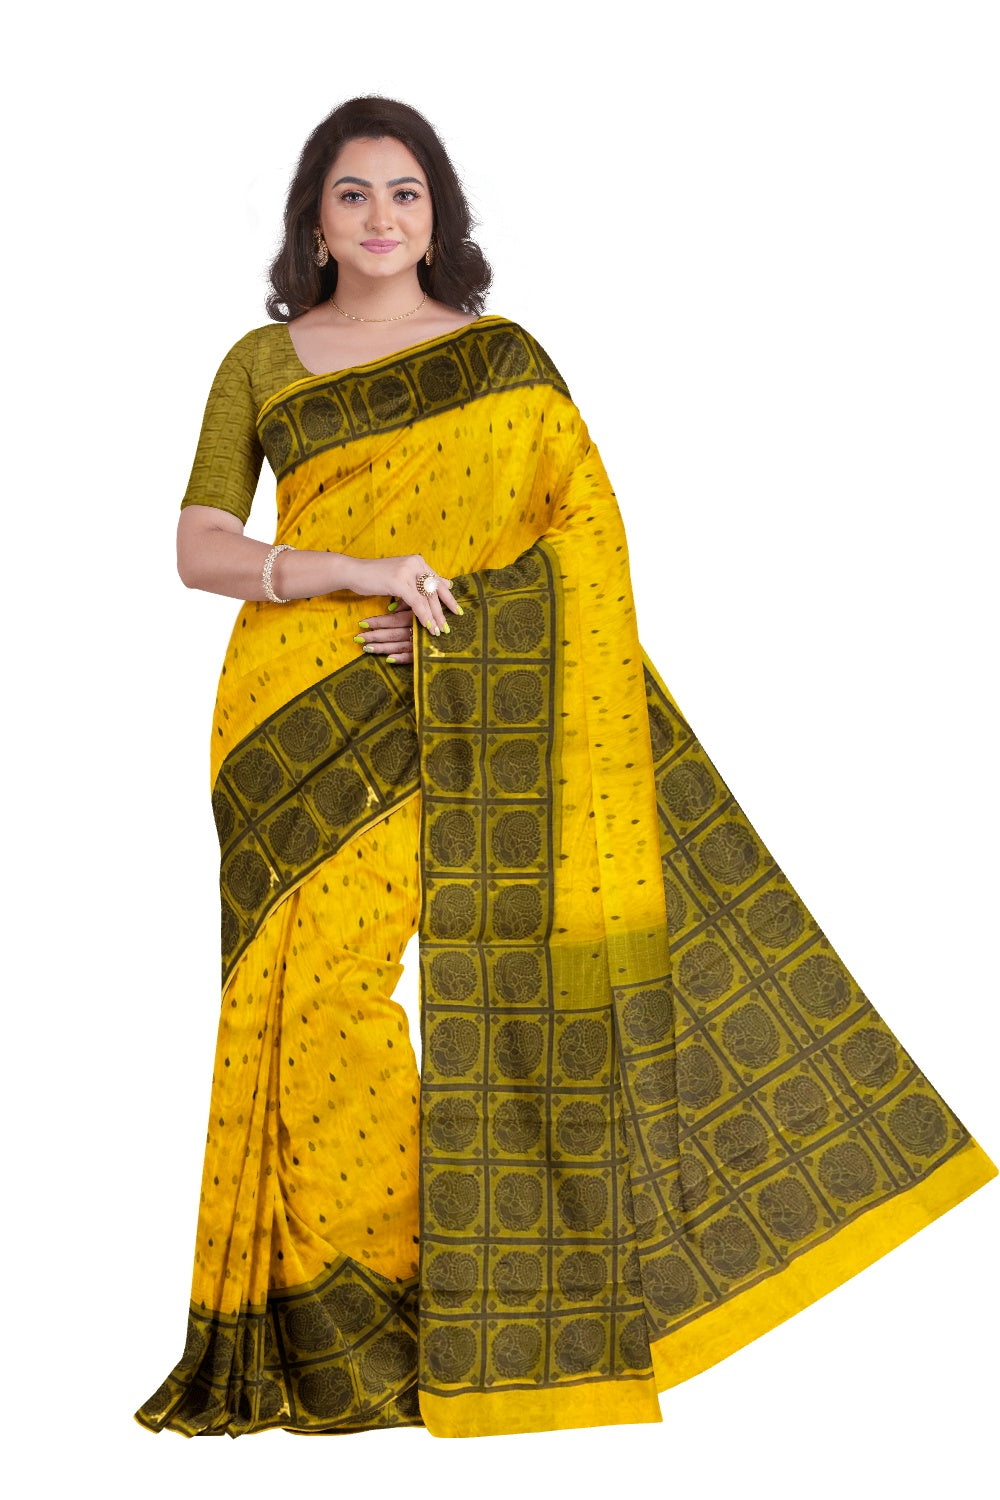 Southloom Sico Gadwal Semi Silk Saree in Mustard Yellow and Olive Green with Peacock Motifs (Blouse Piece with Work)